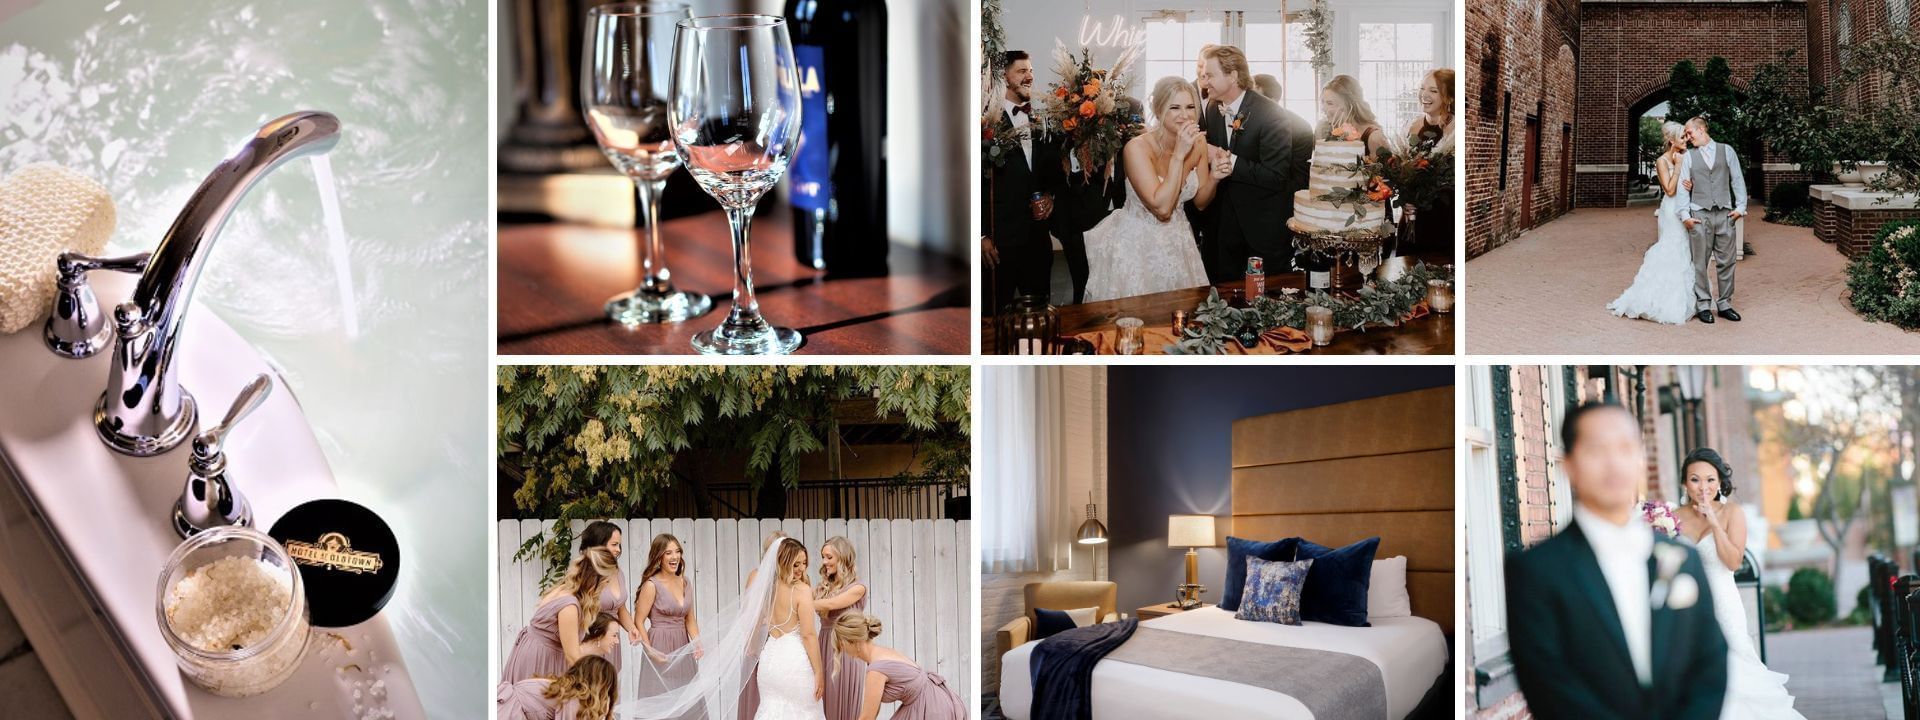 Photo collage of honeymoon suites and wedding parties